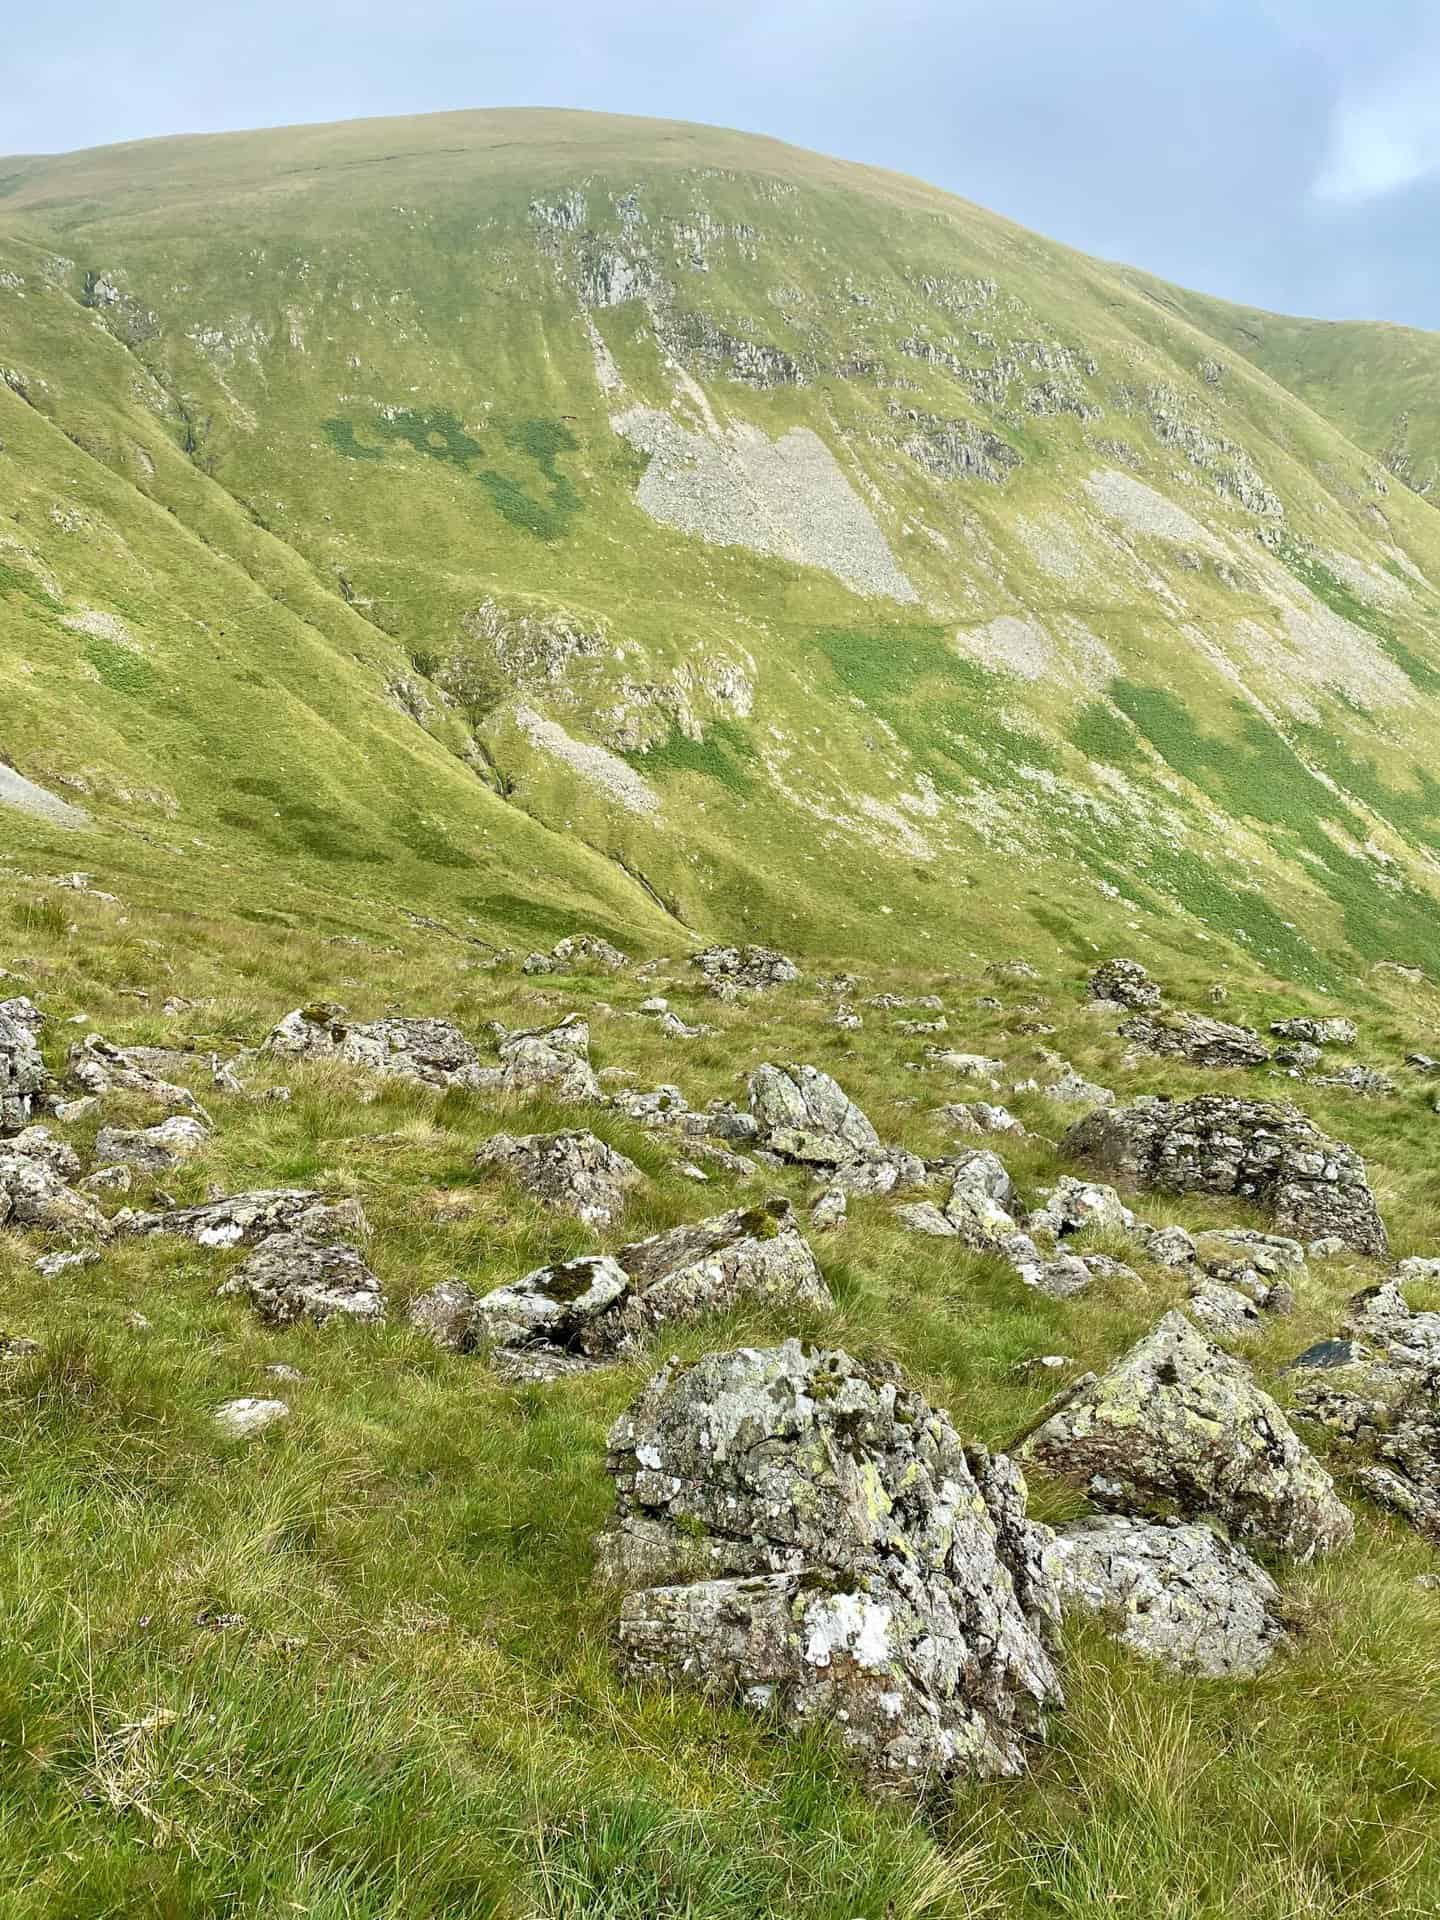 The view back to Scot Crag on the steep southern slopes of Hart Side. The path we had walked along can be seen about half way down the mountainside.